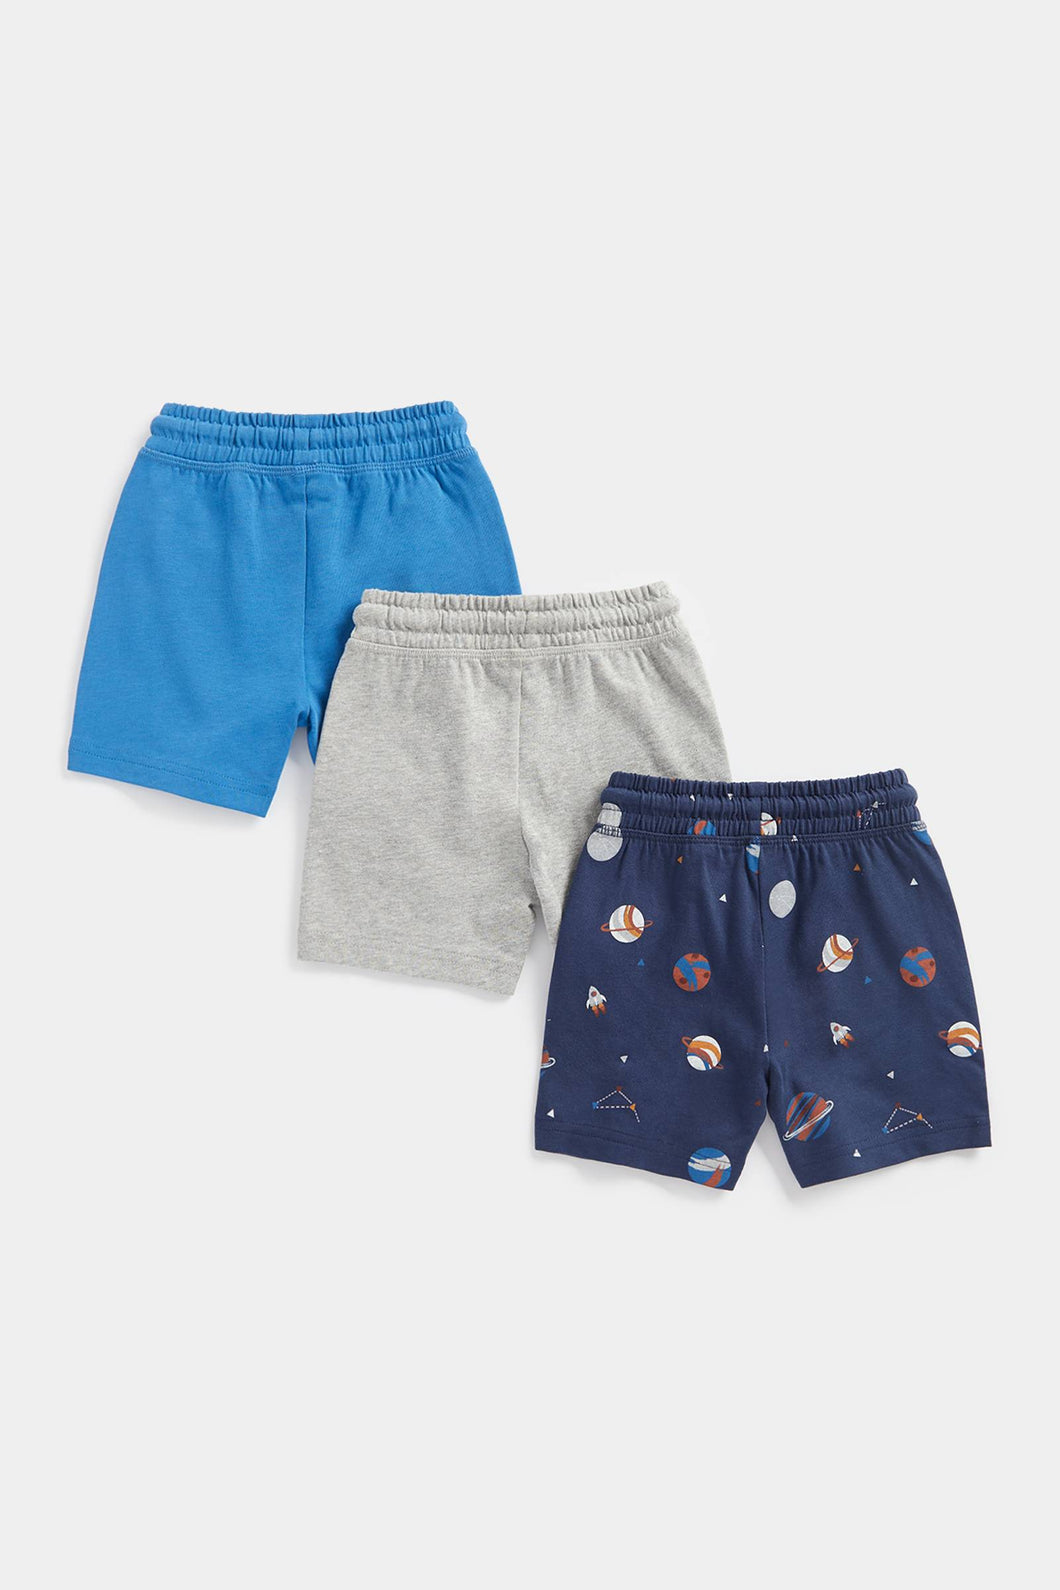 Mothercare Space Jersey Shorts - 3 Pack